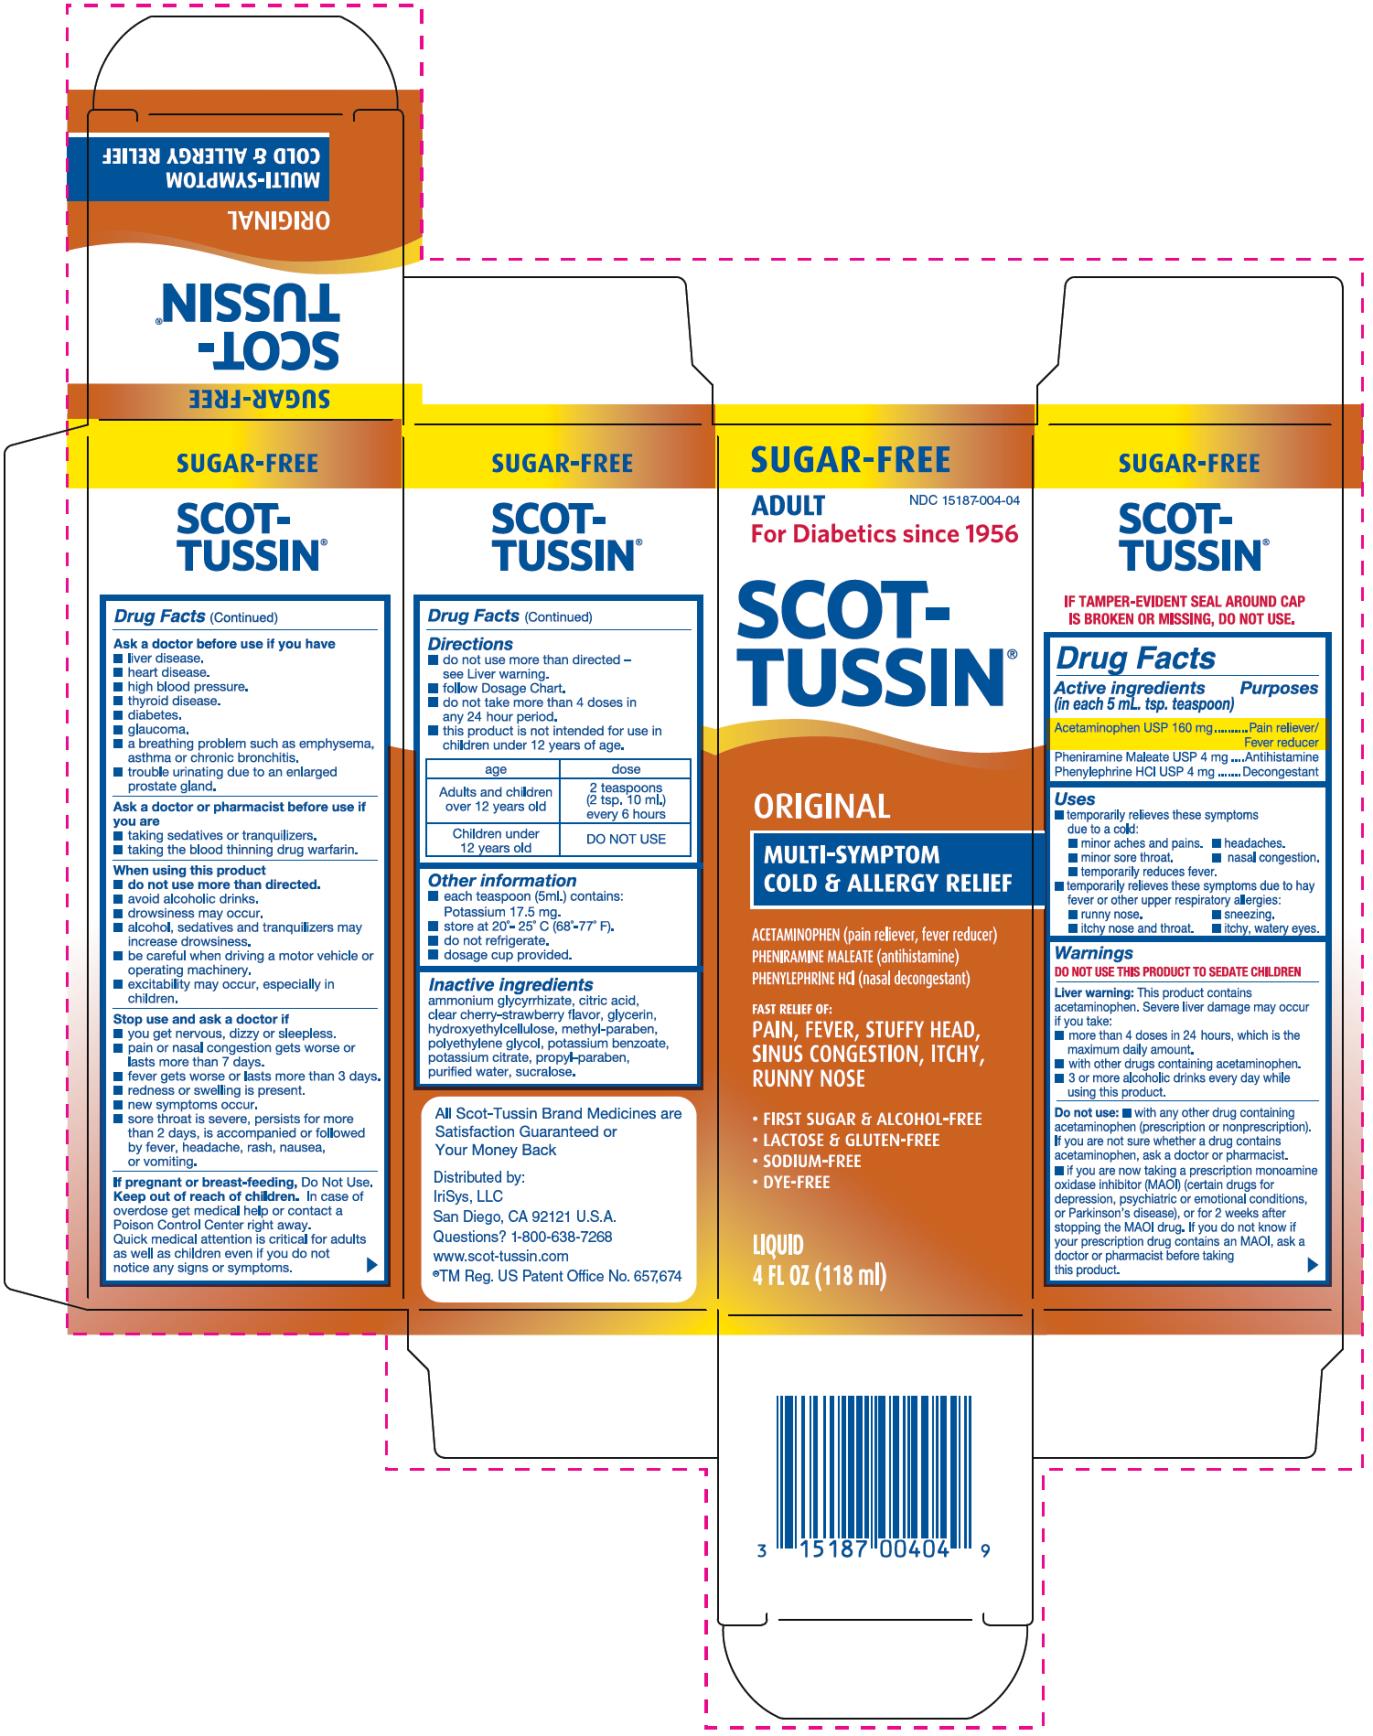 PRINCIPAL DISPLAY PANEL 
SUGAR-FREE
ADULT
NDC 15187-004-04
For Diabetics since 1956
SCOT-TUSSIN®
ORIGINAL
MULTI-SYMPTOM
COLD & ALLERGY RELIEF
ACETAMINOPHEN (pain reliever, fever reducer)
PHENIRAMINE MALEATE (antihistamine)
PHENYLEPHRINE HCI (nasal decongestant)
FAST RELIEF OF:
PAIN, FEVER, STUFFY HEAD,
SINUS CONGESTION, ITCHY,
RUNNY NOSE
•	FIRST SUGAR & ALCOHOL-FREE
•	LACTOSE & GLUTEN-FREE
•	SODIUM-FREE
•	DYE-FREE
LIQUID
4 FL OZ (118 ml)
